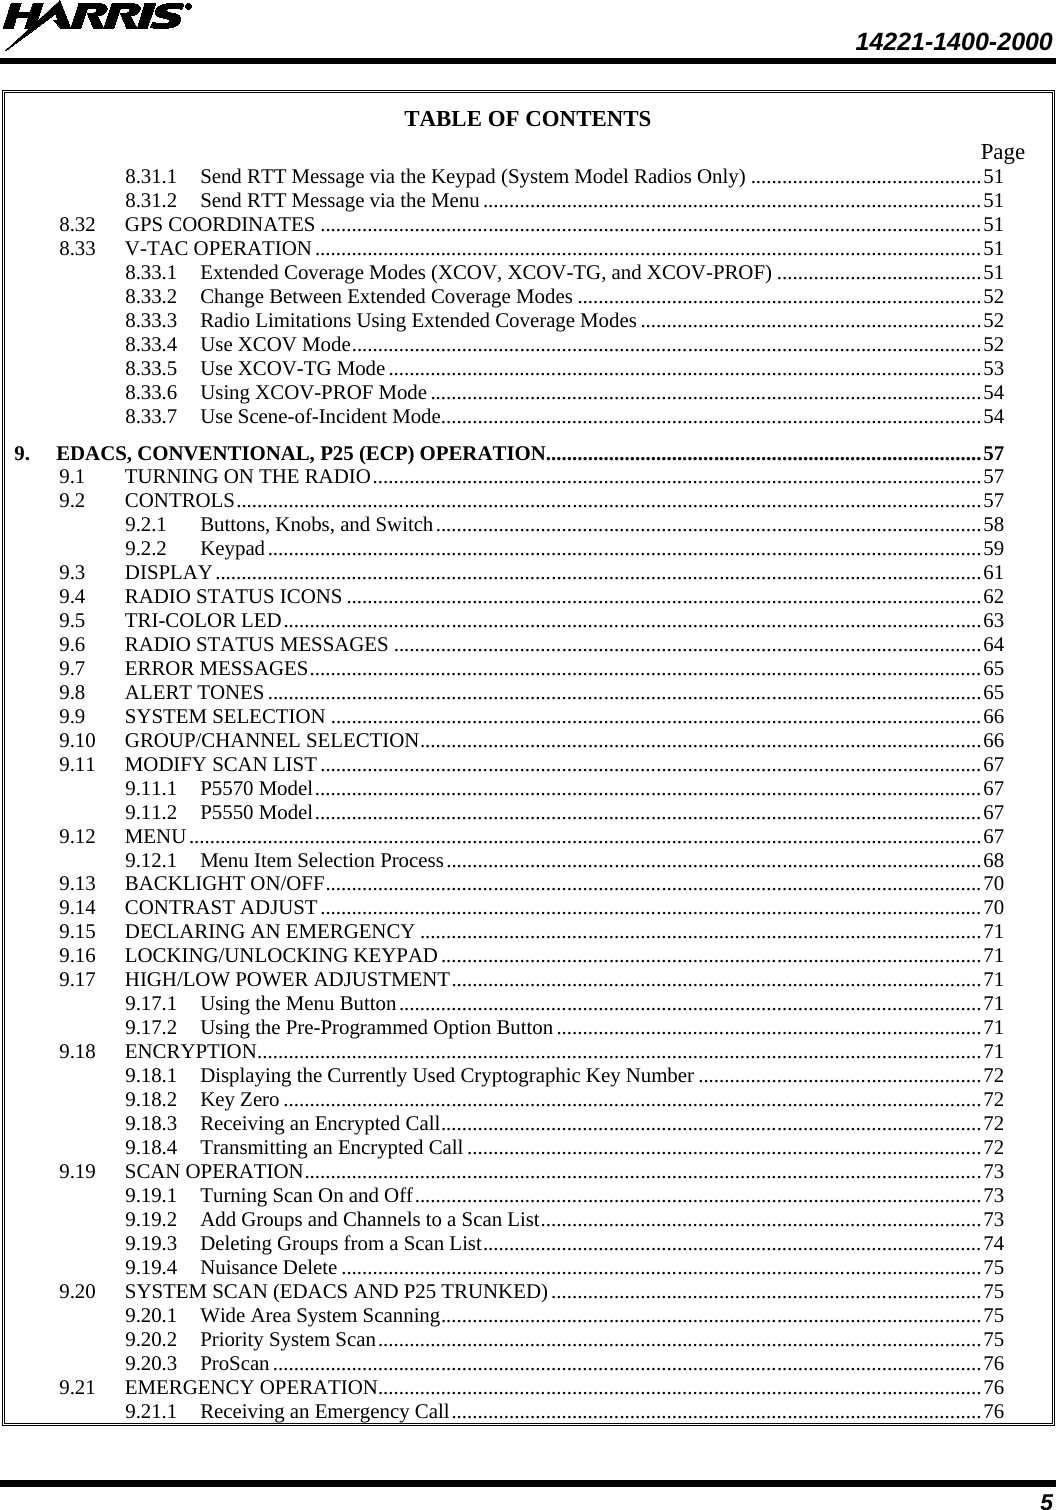  14221-1400-2000  5 TABLE OF CONTENTS Page 8.31.1 Send RTT Message via the Keypad (System Model Radios Only) ............................................ 51 8.31.2 Send RTT Message via the Menu ............................................................................................... 51 8.32 GPS COORDINATES .............................................................................................................................. 51 8.33 V-TAC OPERATION ............................................................................................................................... 51 8.33.1 Extended Coverage Modes (XCOV, XCOV-TG, and XCOV-PROF) ....................................... 51 8.33.2 Change Between Extended Coverage Modes ............................................................................. 52 8.33.3 Radio Limitations Using Extended Coverage Modes ................................................................. 52 8.33.4 Use XCOV Mode ........................................................................................................................ 52 8.33.5 Use XCOV-TG Mode ................................................................................................................. 53 8.33.6 Using XCOV-PROF Mode ......................................................................................................... 54 8.33.7 Use Scene-of-Incident Mode ....................................................................................................... 54 9. EDACS, CONVENTIONAL, P25 (ECP) OPERATION ................................................................................... 57 9.1 TURNING ON THE RADIO .................................................................................................................... 57 9.2 CONTROLS .............................................................................................................................................. 57 9.2.1 Buttons, Knobs, and Switch ........................................................................................................ 58 9.2.2 Keypad ........................................................................................................................................ 59 9.3 DISPLAY .................................................................................................................................................. 61 9.4 RADIO STATUS ICONS ......................................................................................................................... 62 9.5 TRI-COLOR LED ..................................................................................................................................... 63 9.6 RADIO STATUS MESSAGES ................................................................................................................ 64 9.7 ERROR MESSAGES ................................................................................................................................ 65 9.8 ALERT TONES ........................................................................................................................................ 65 9.9 SYSTEM SELECTION ............................................................................................................................ 66 9.10 GROUP/CHANNEL SELECTION ........................................................................................................... 66 9.11 MODIFY SCAN LIST .............................................................................................................................. 67 9.11.1 P5570 Model ............................................................................................................................... 67 9.11.2 P5550 Model ............................................................................................................................... 67 9.12 MENU ....................................................................................................................................................... 67 9.12.1 Menu Item Selection Process ...................................................................................................... 68 9.13 BACKLIGHT ON/OFF ............................................................................................................................. 70 9.14 CONTRAST ADJUST .............................................................................................................................. 70 9.15 DECLARING AN EMERGENCY ........................................................................................................... 71 9.16 LOCKING/UNLOCKING KEYPAD ....................................................................................................... 71 9.17 HIGH/LOW POWER ADJUSTMENT ..................................................................................................... 71 9.17.1 Using the Menu Button ............................................................................................................... 71 9.17.2 Using the Pre-Programmed Option Button ................................................................................. 71 9.18 ENCRYPTION .......................................................................................................................................... 71 9.18.1 Displaying the Currently Used Cryptographic Key Number ...................................................... 72 9.18.2 Key Zero ..................................................................................................................................... 72 9.18.3 Receiving an Encrypted Call ....................................................................................................... 72 9.18.4 Transmitting an Encrypted Call .................................................................................................. 72 9.19 SCAN OPERATION ................................................................................................................................. 73 9.19.1 Turning Scan On and Off ............................................................................................................ 73 9.19.2 Add Groups and Channels to a Scan List .................................................................................... 73 9.19.3 Deleting Groups from a Scan List ............................................................................................... 74 9.19.4 Nuisance Delete .......................................................................................................................... 75 9.20 SYSTEM SCAN (EDACS AND P25 TRUNKED) .................................................................................. 75 9.20.1 Wide Area System Scanning ....................................................................................................... 75 9.20.2 Priority System Scan ................................................................................................................... 75 9.20.3 ProScan ....................................................................................................................................... 76 9.21 EMERGENCY OPERATION ................................................................................................................... 76 9.21.1 Receiving an Emergency Call ..................................................................................................... 76 